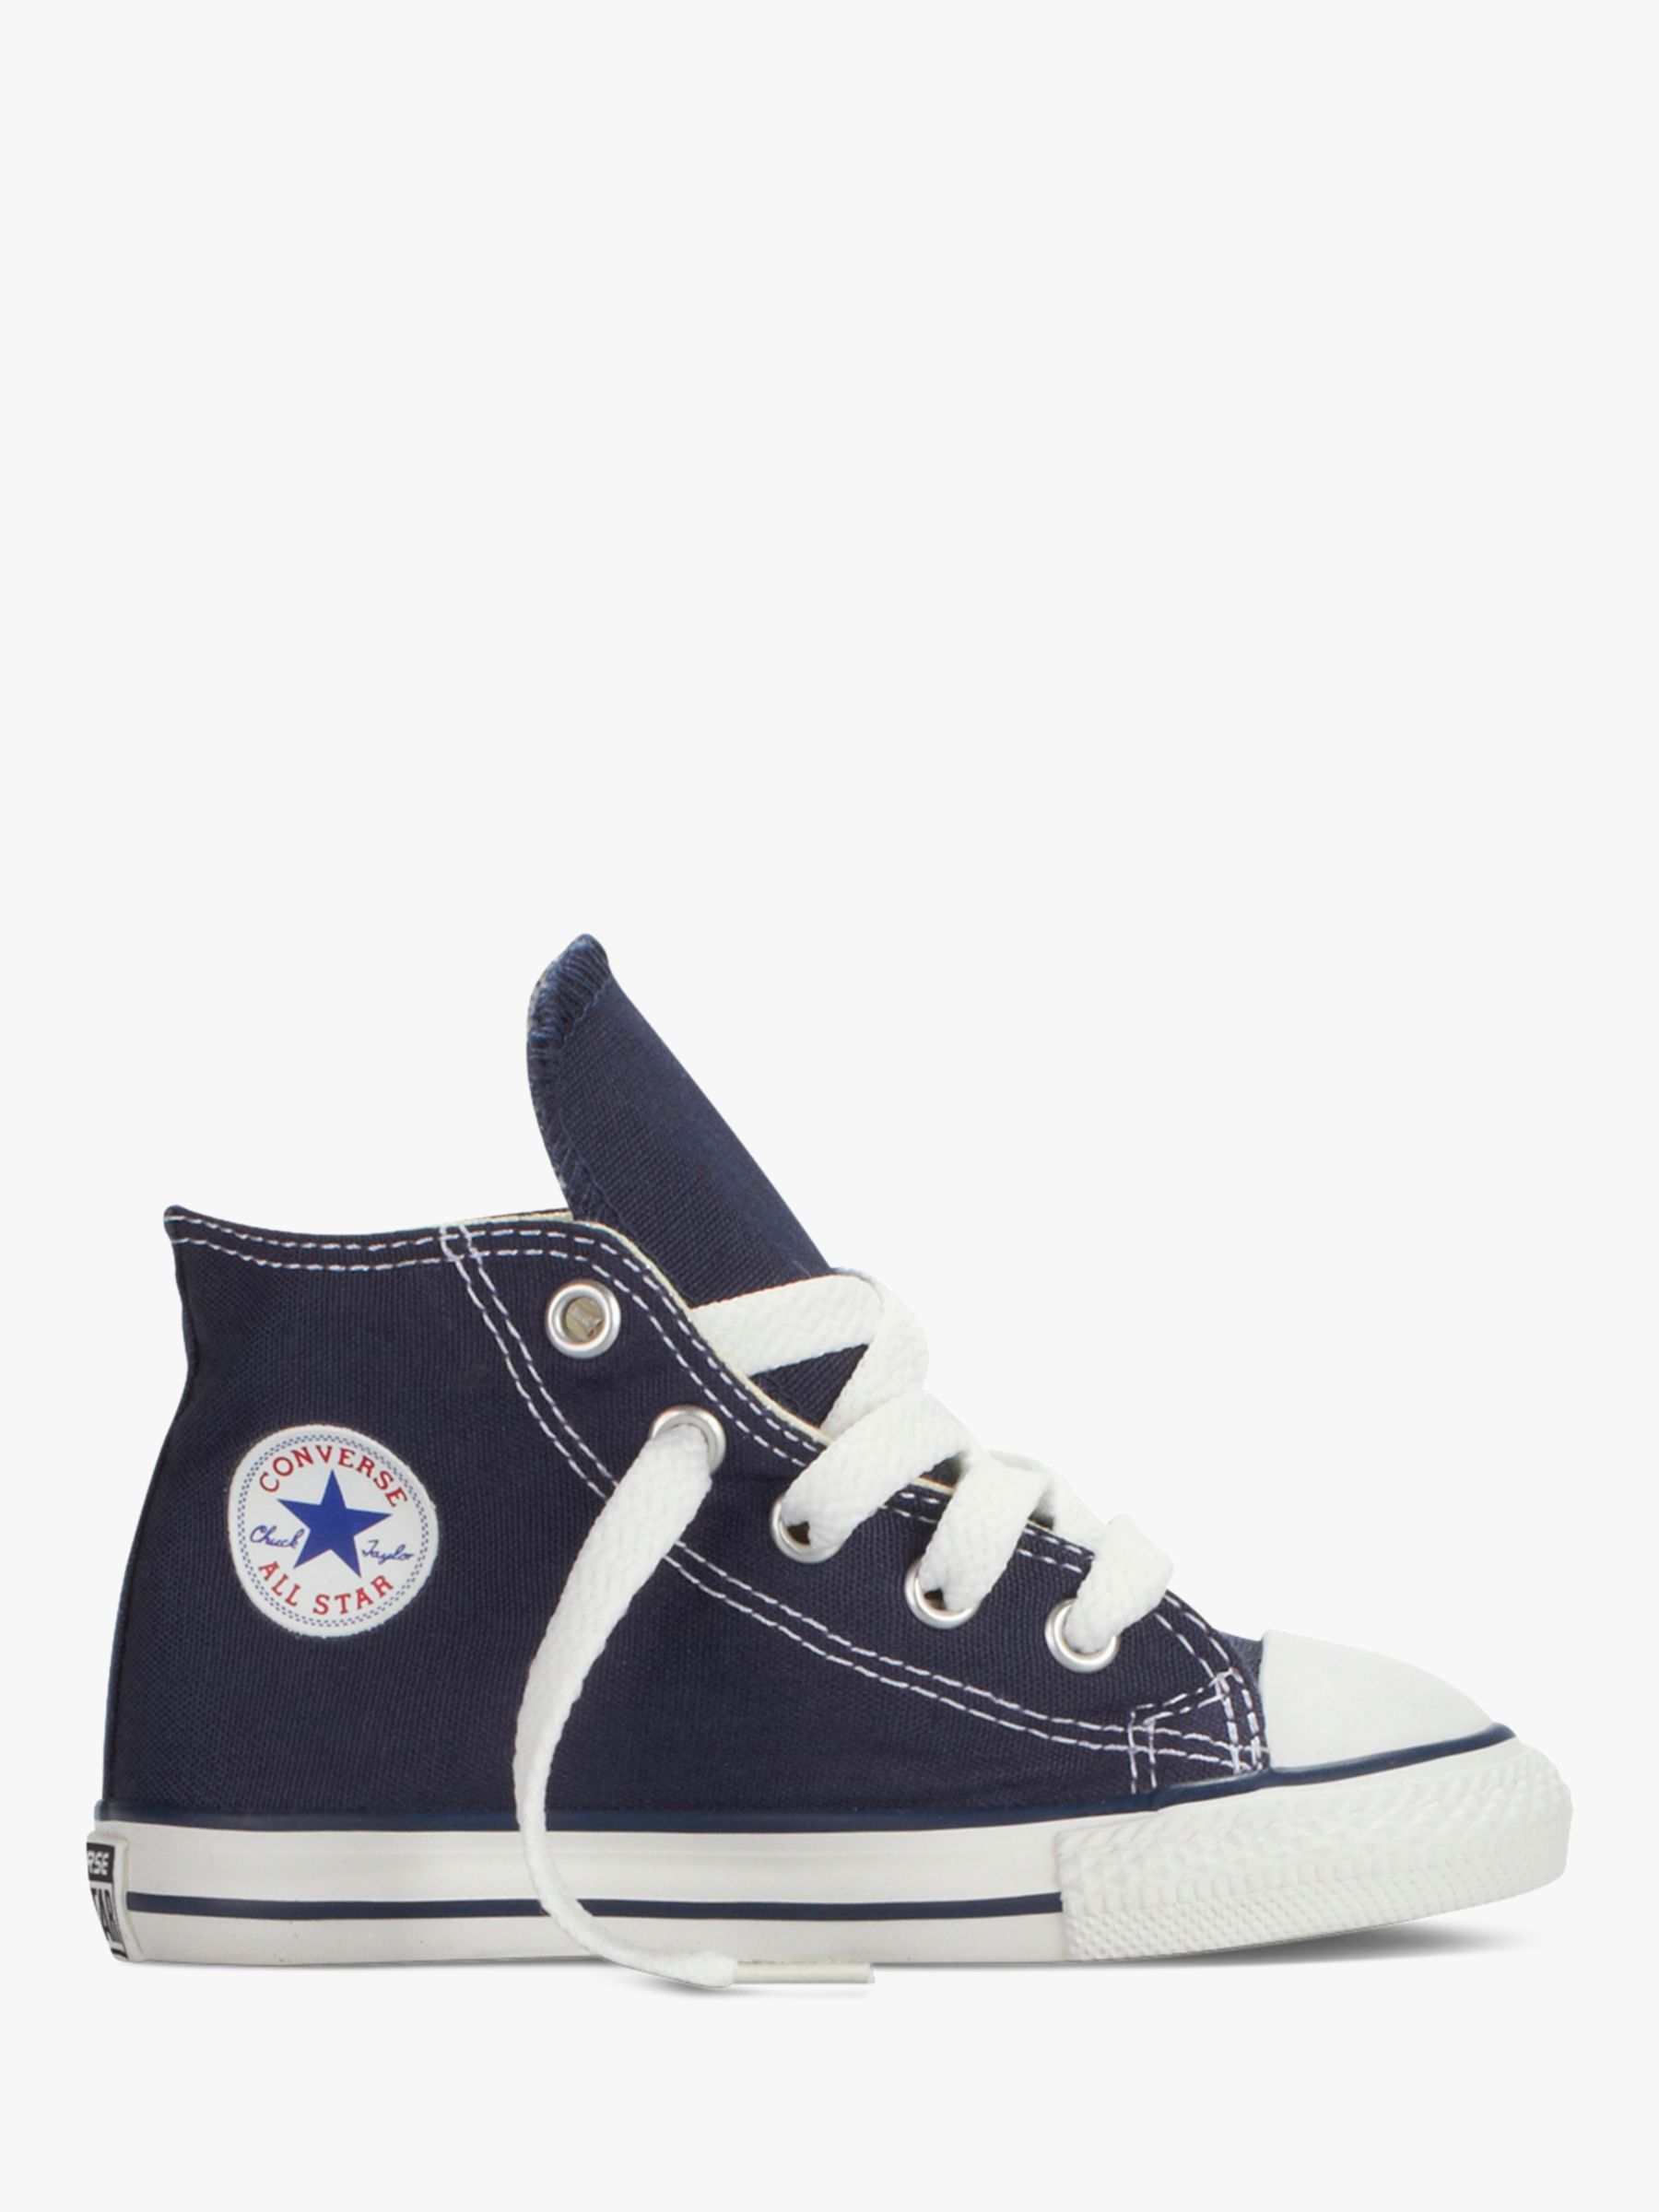 Converse All Star Core-Hi Trainers, Navy, Size 4 Adult